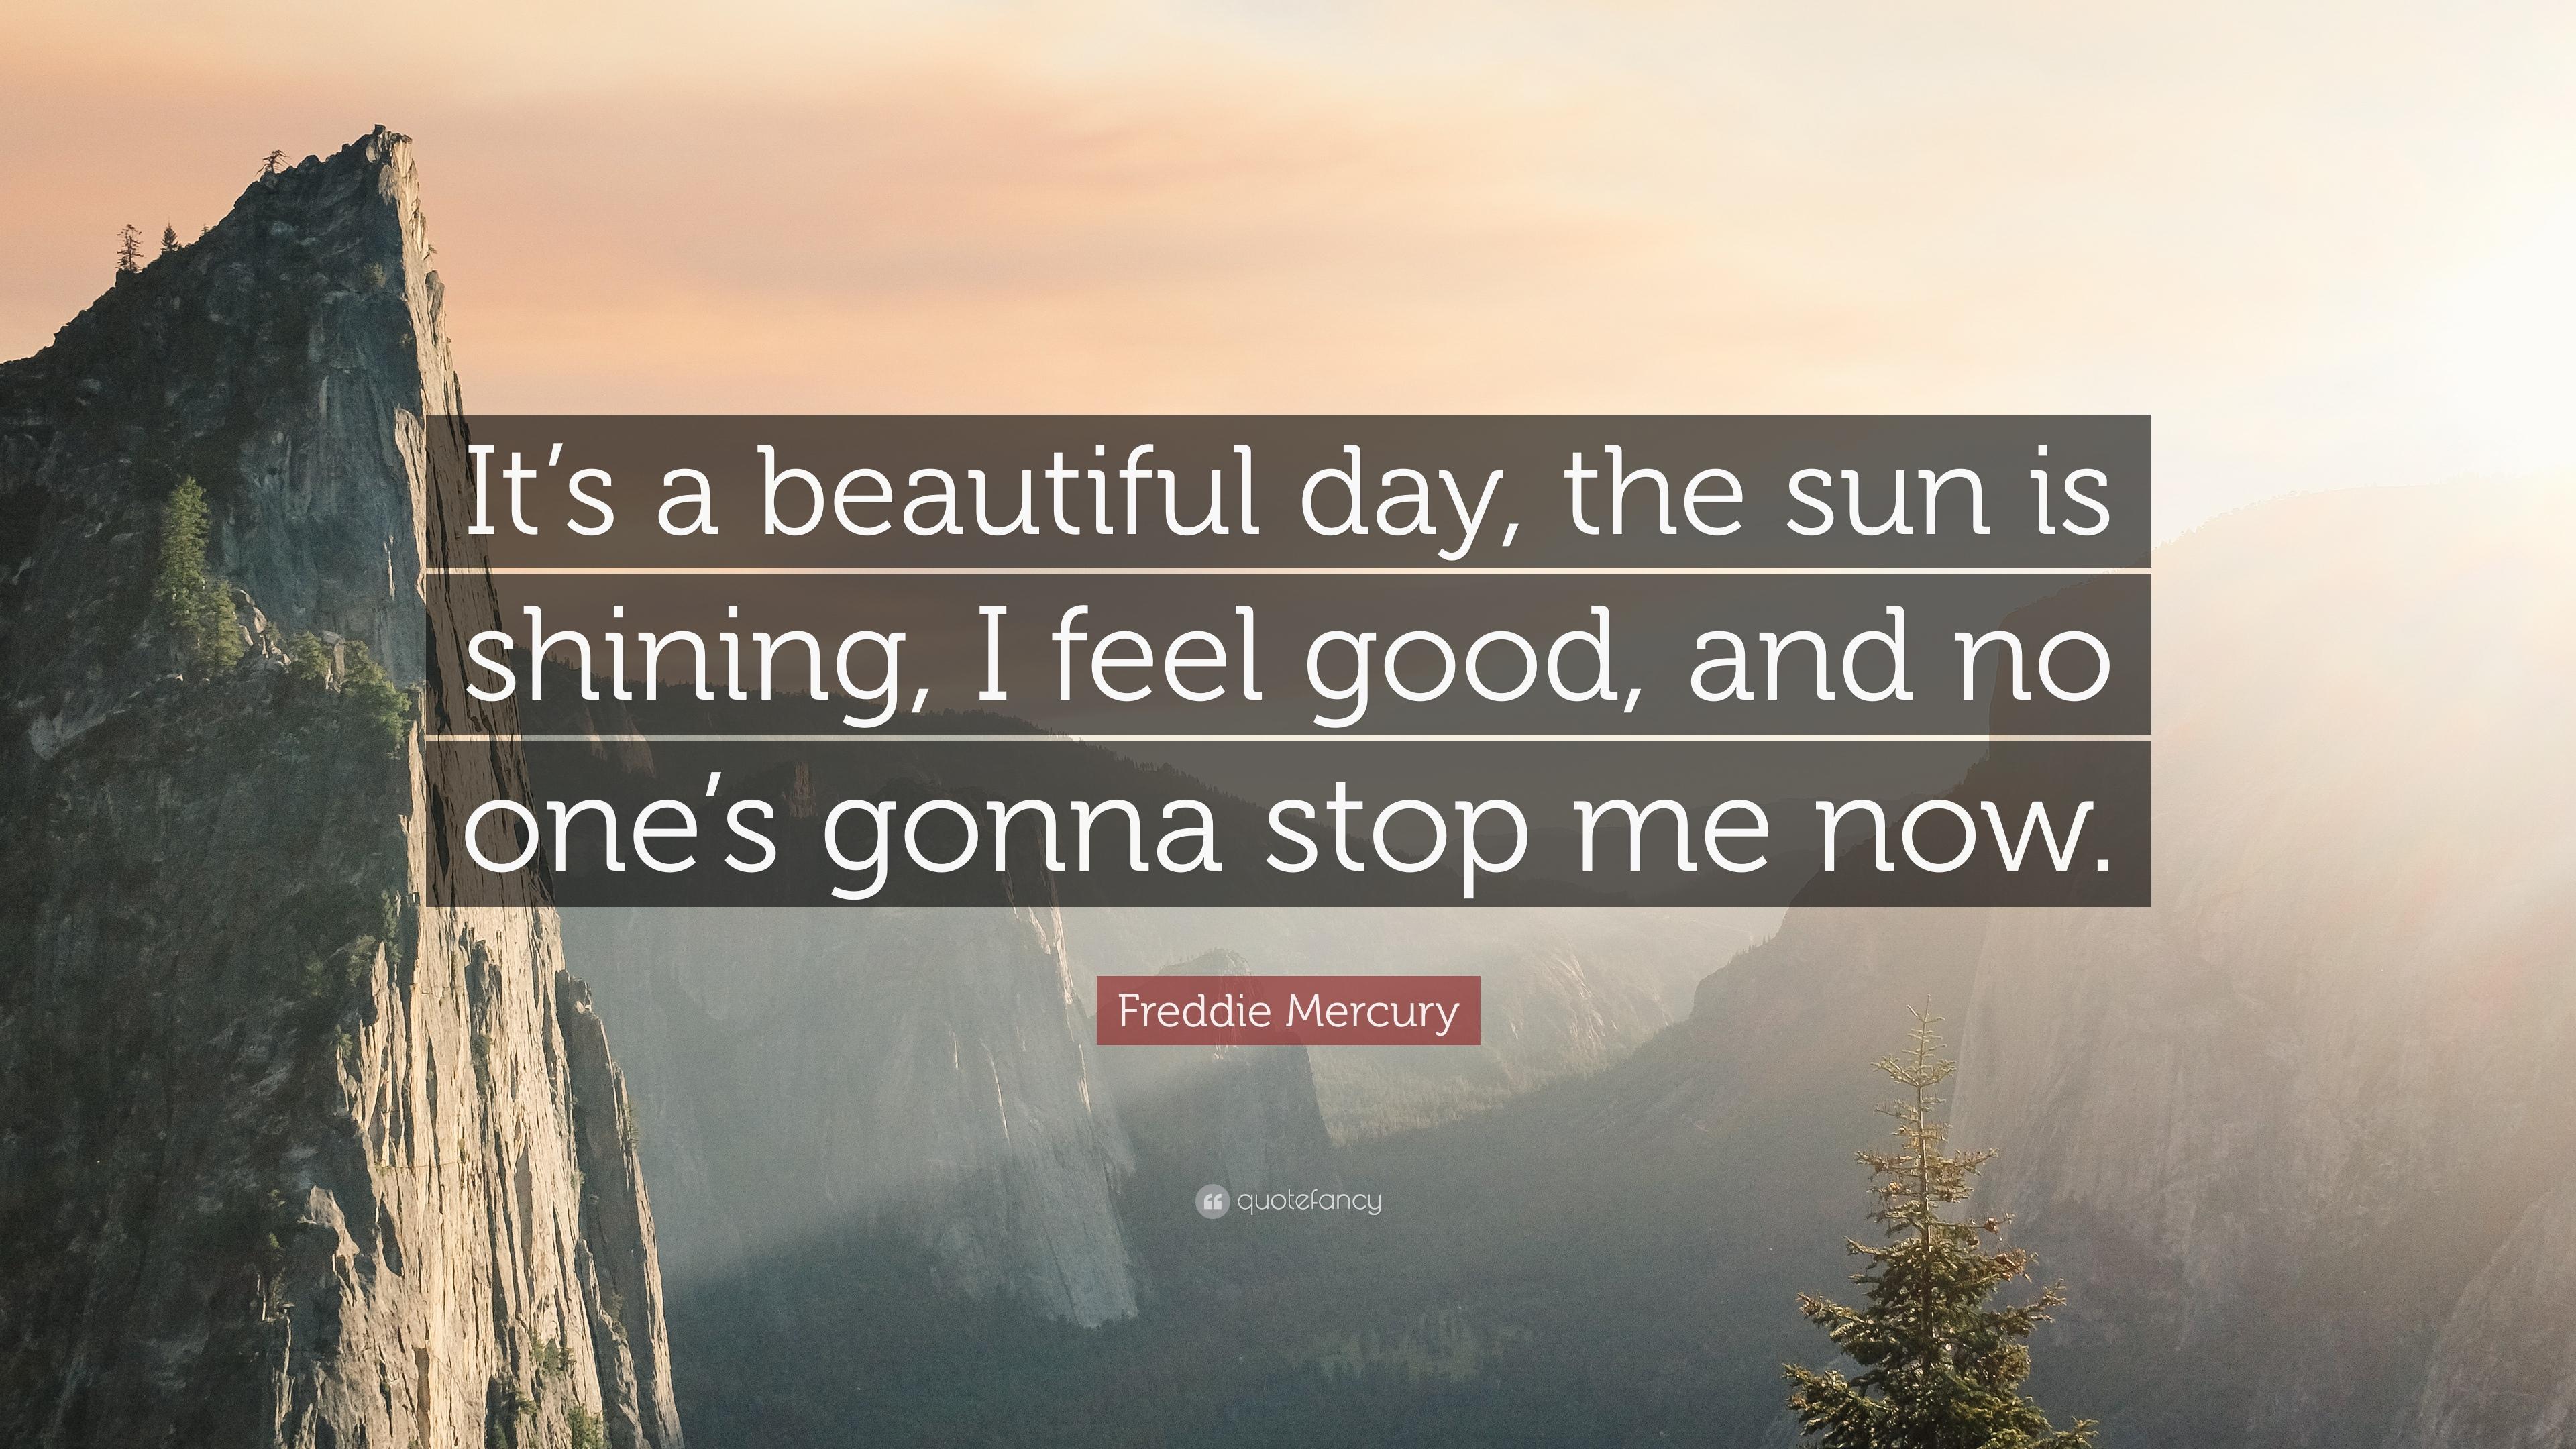 Freddie Mercury Quote: “It's a beautiful day, the sun is